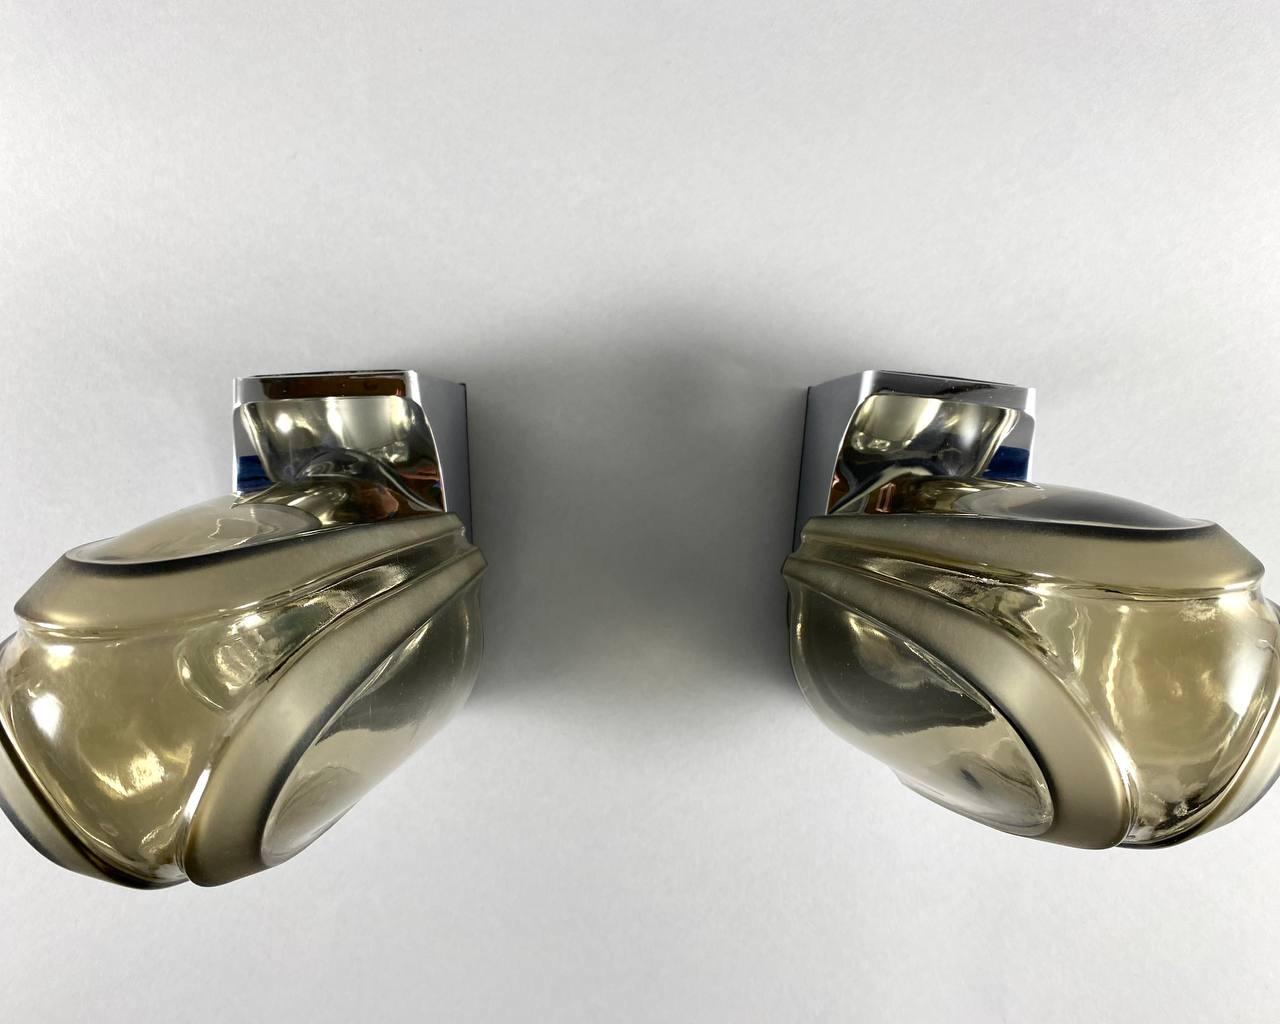 Hoffmeister-Leuchten Paired Wall Sconces, Germany, Designer Wall Lamps, Vintage  For Sale 2